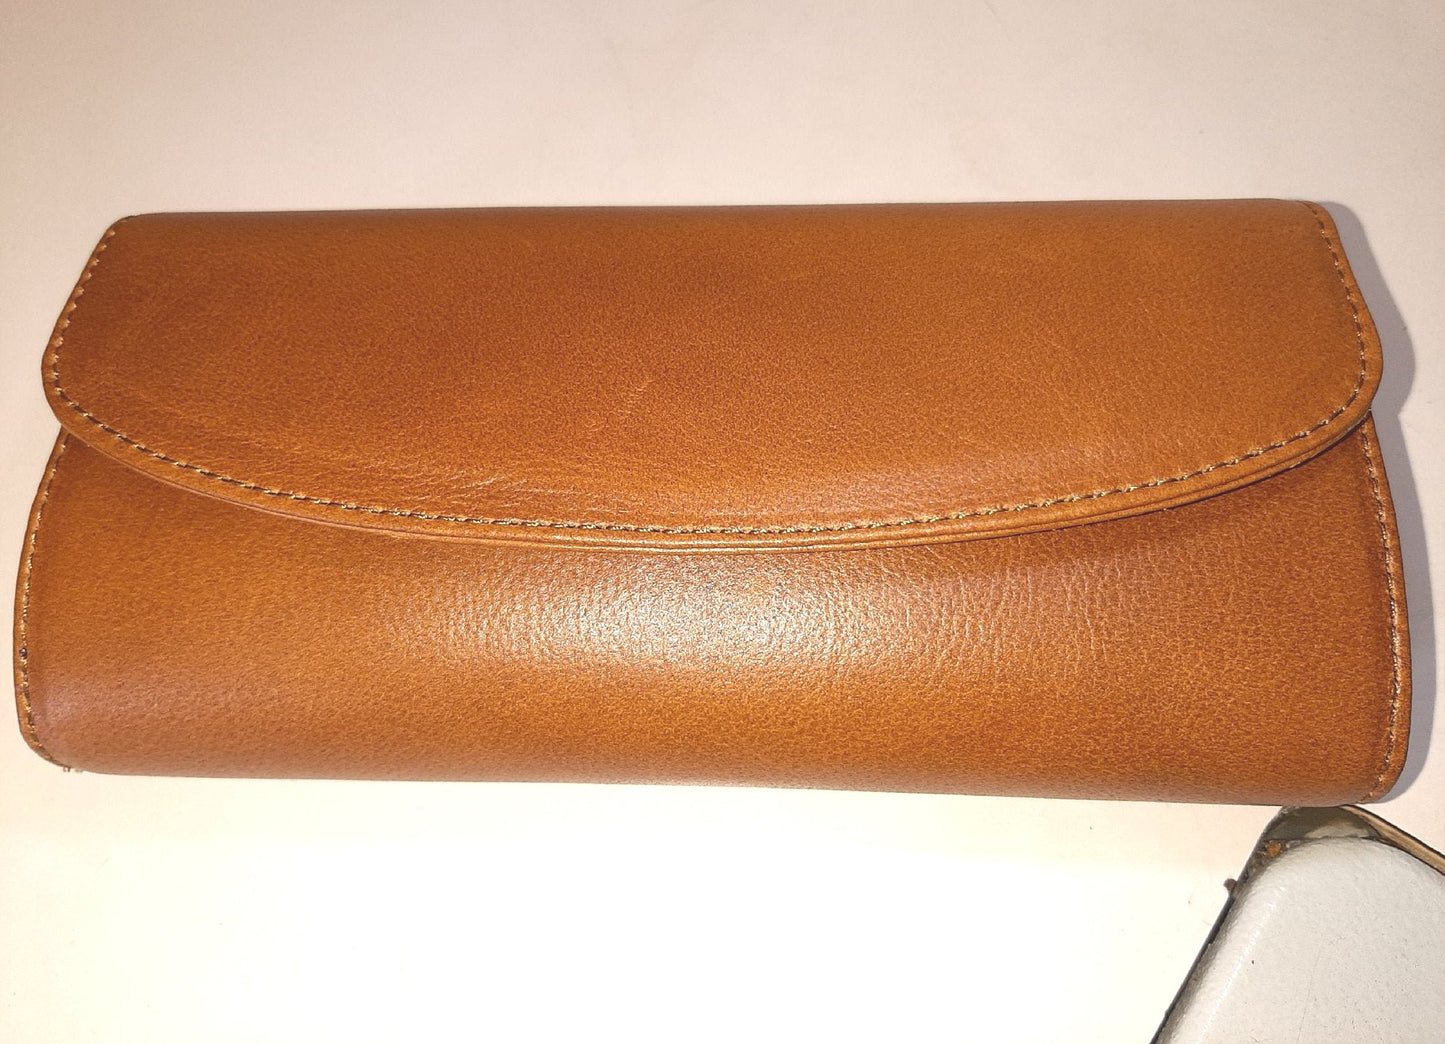 Genuine leather hand made ladies wallets/purse in brown tan colour 